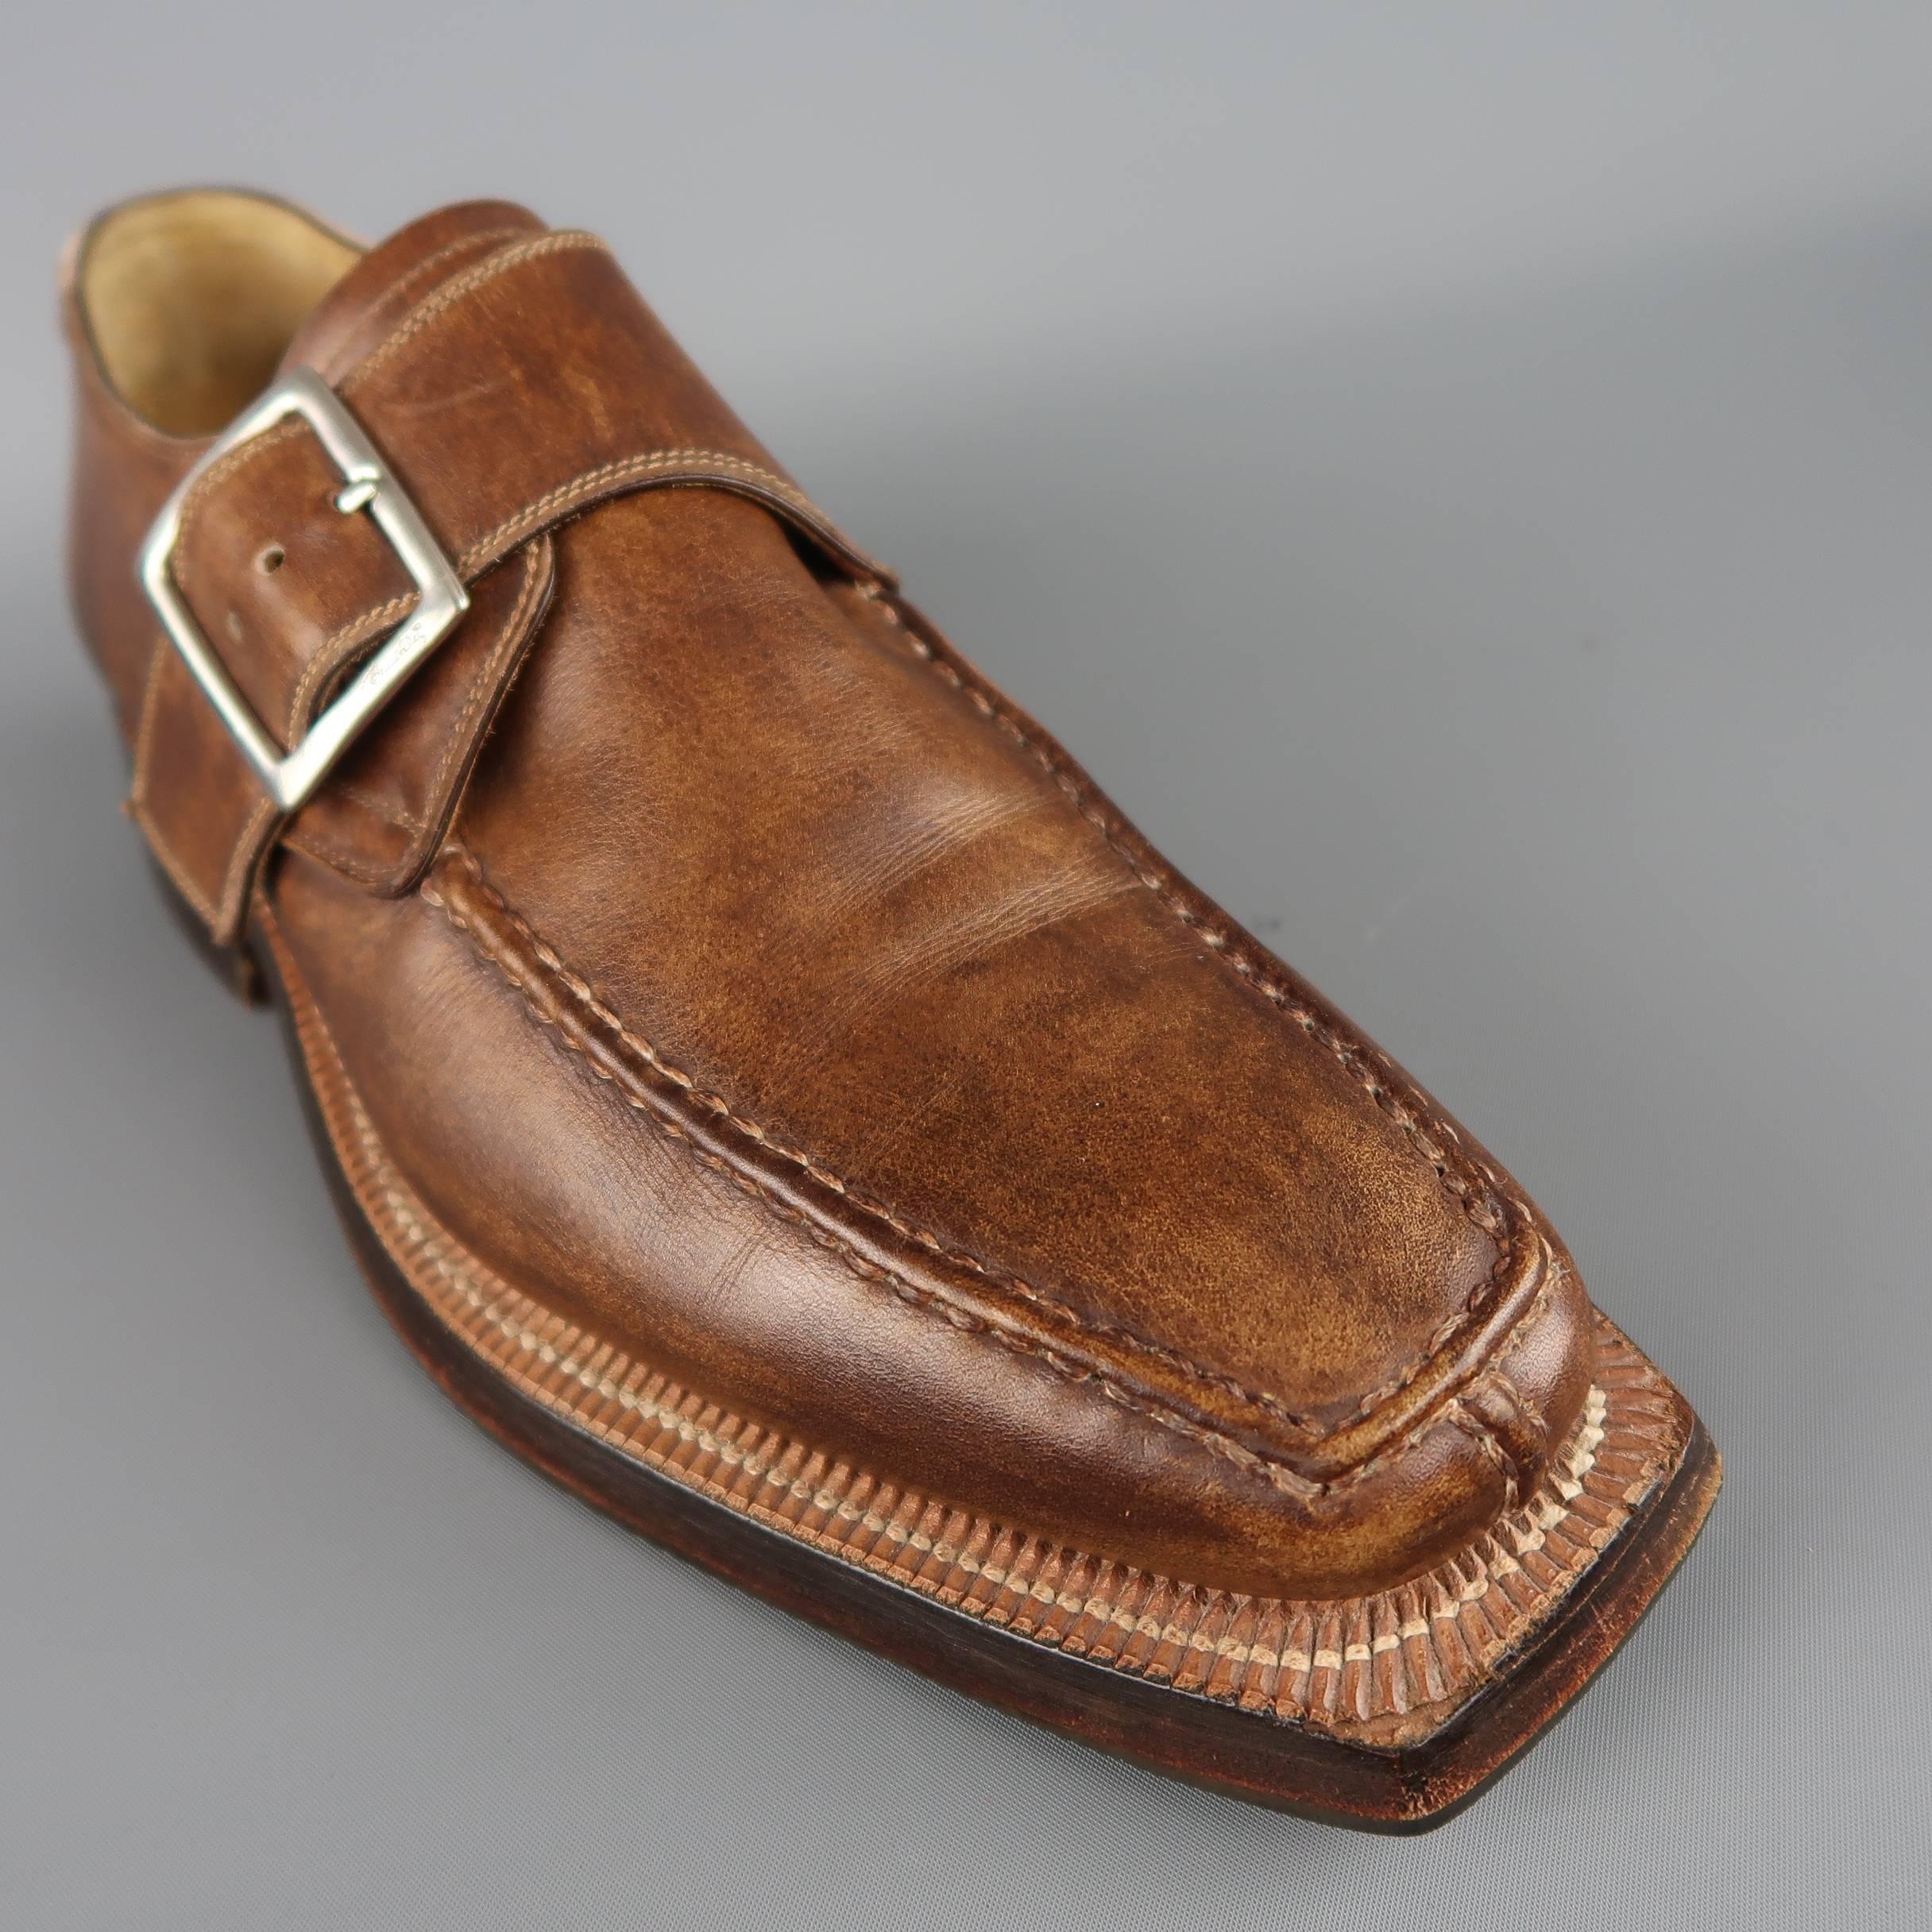 STEFANO BRANCHINI dress shoes come in a antique distressed tan leather and feature a squared split toe with apron top stitching, chunky outsole, and single monk strap with silver tone engraved buckle. Made in Italy.
 
Good Pre-Owned